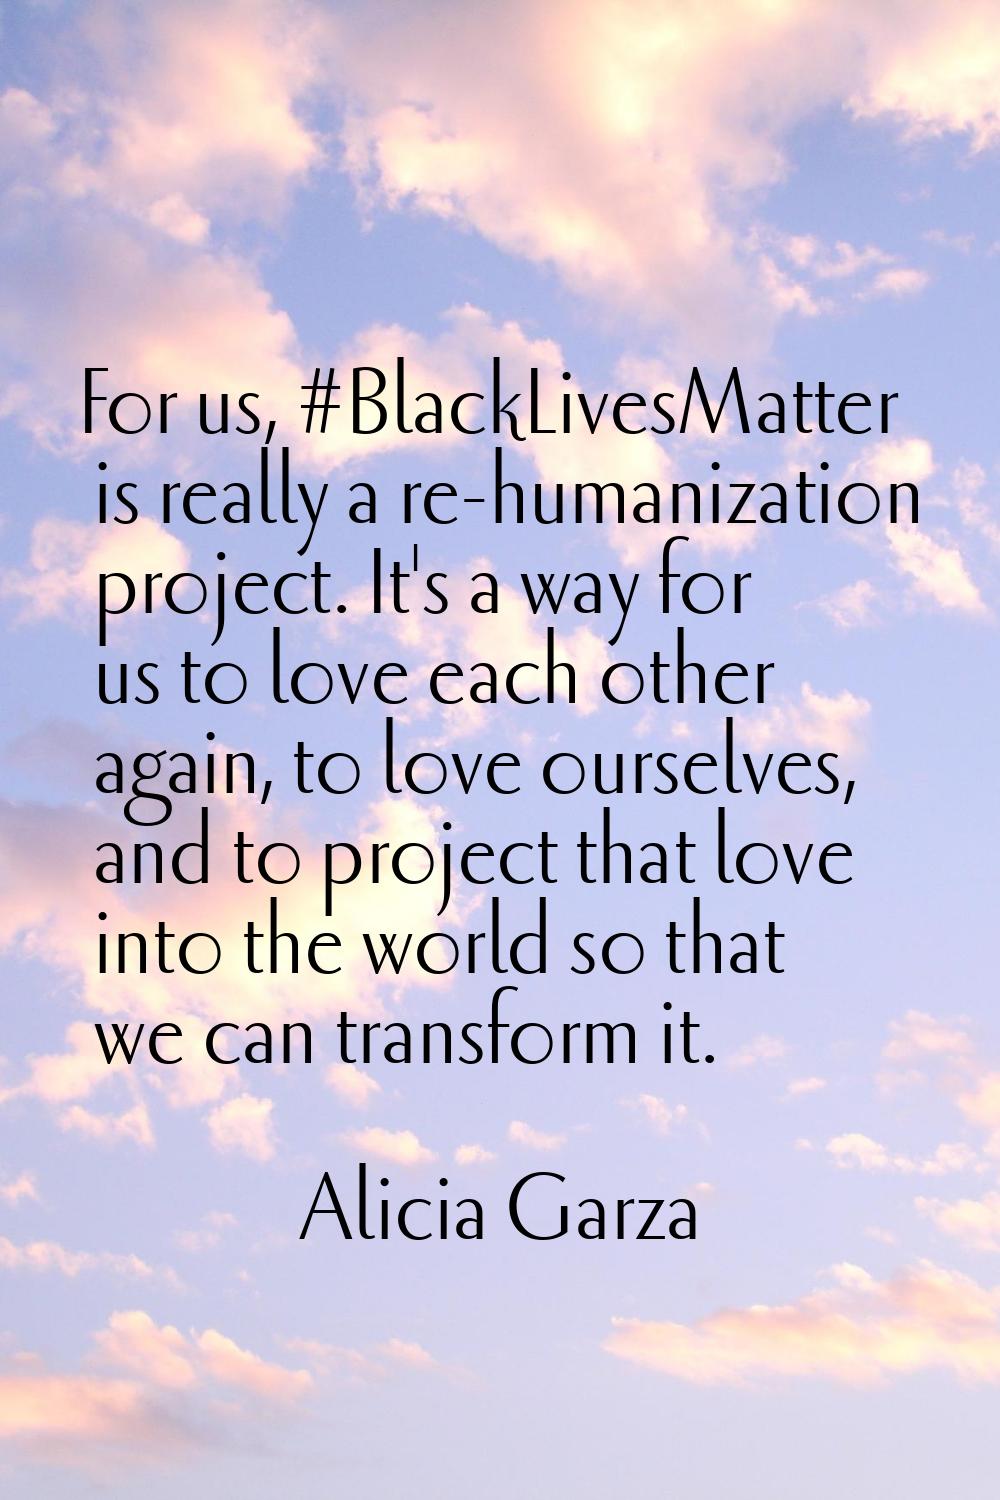 For us, #BlackLivesMatter is really a re-humanization project. It's a way for us to love each other